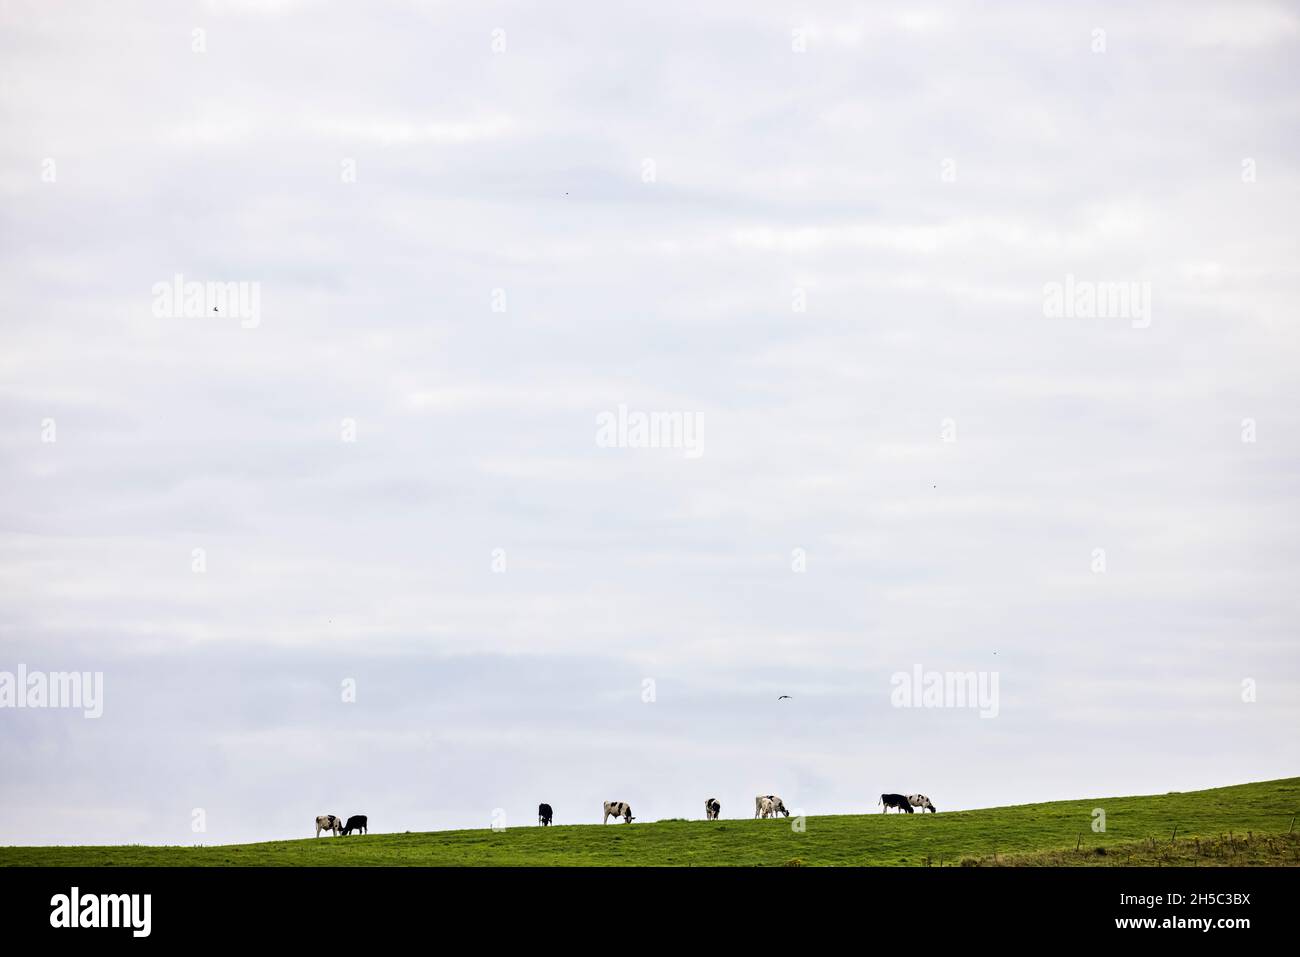 Cattle grazing in a pasture on a hilltop with a large open sky above, near Kinsale, County Cork, Ireland Stock Photo